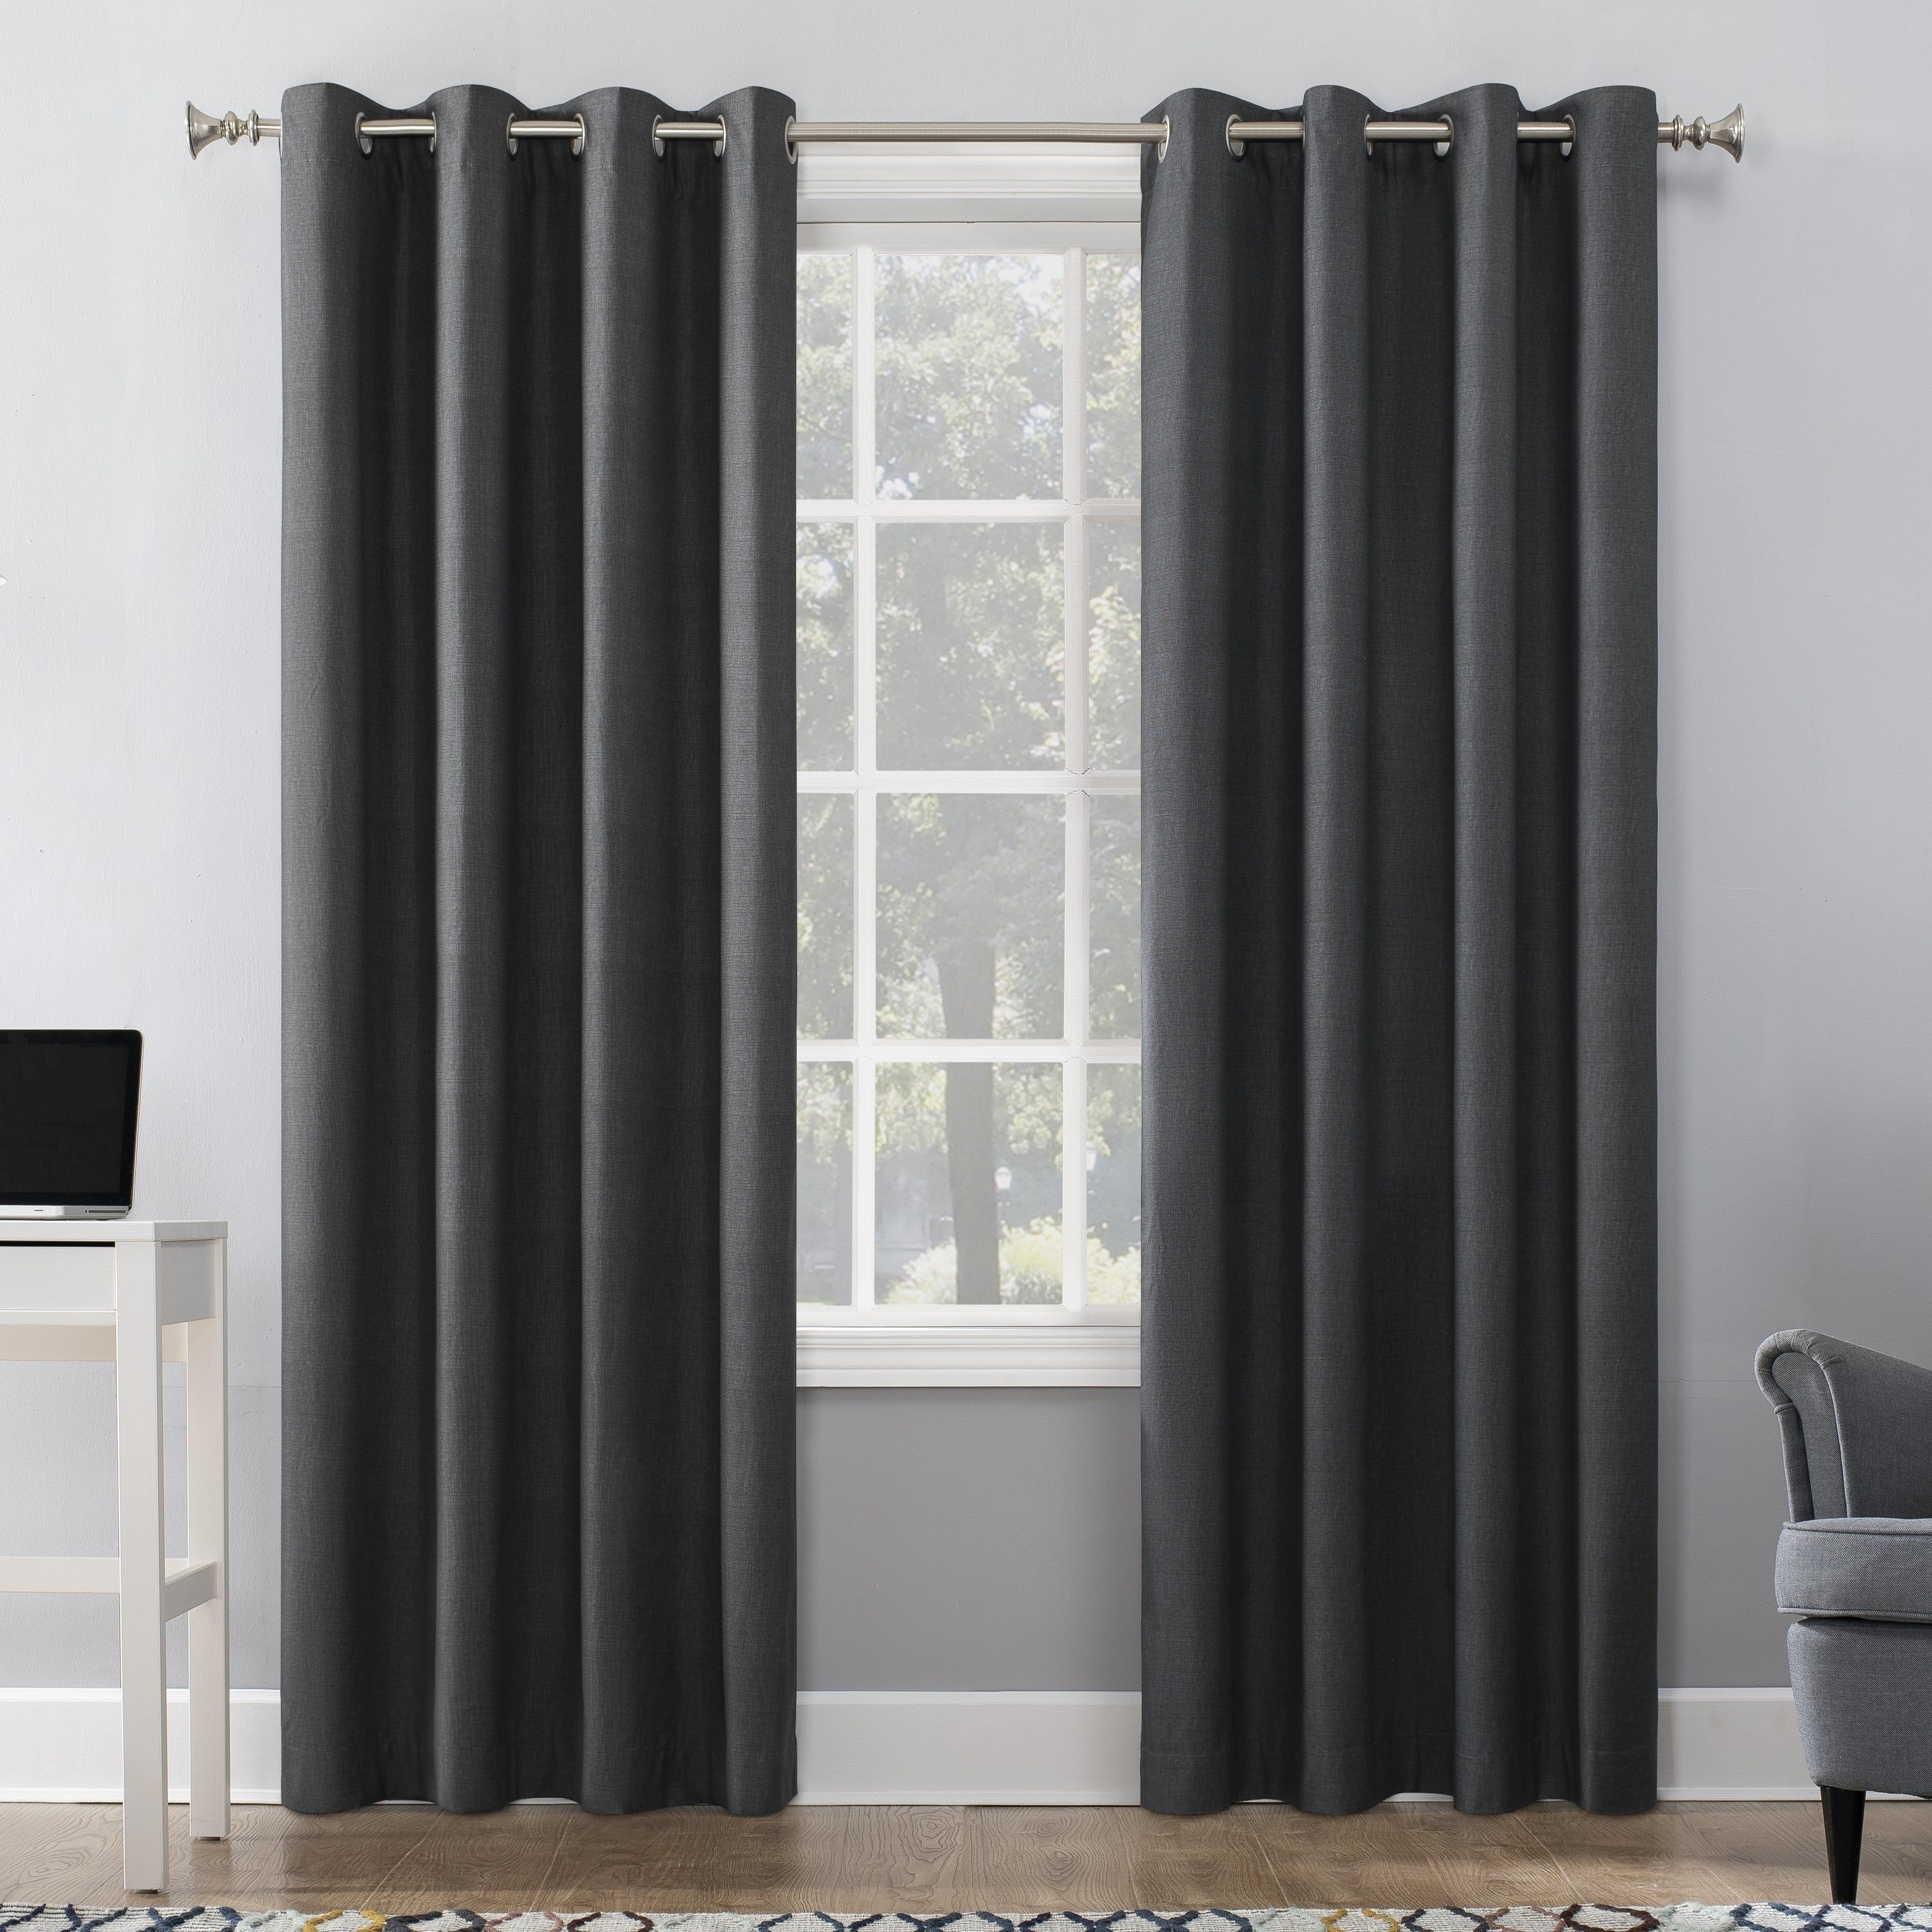 Sun Zero Duran Thermal Insulated 100% Blackout Grommet Curtain Panel Pertaining To Cyrus Thermal Blackout Back Tab Curtain Panels (View 2 of 20)